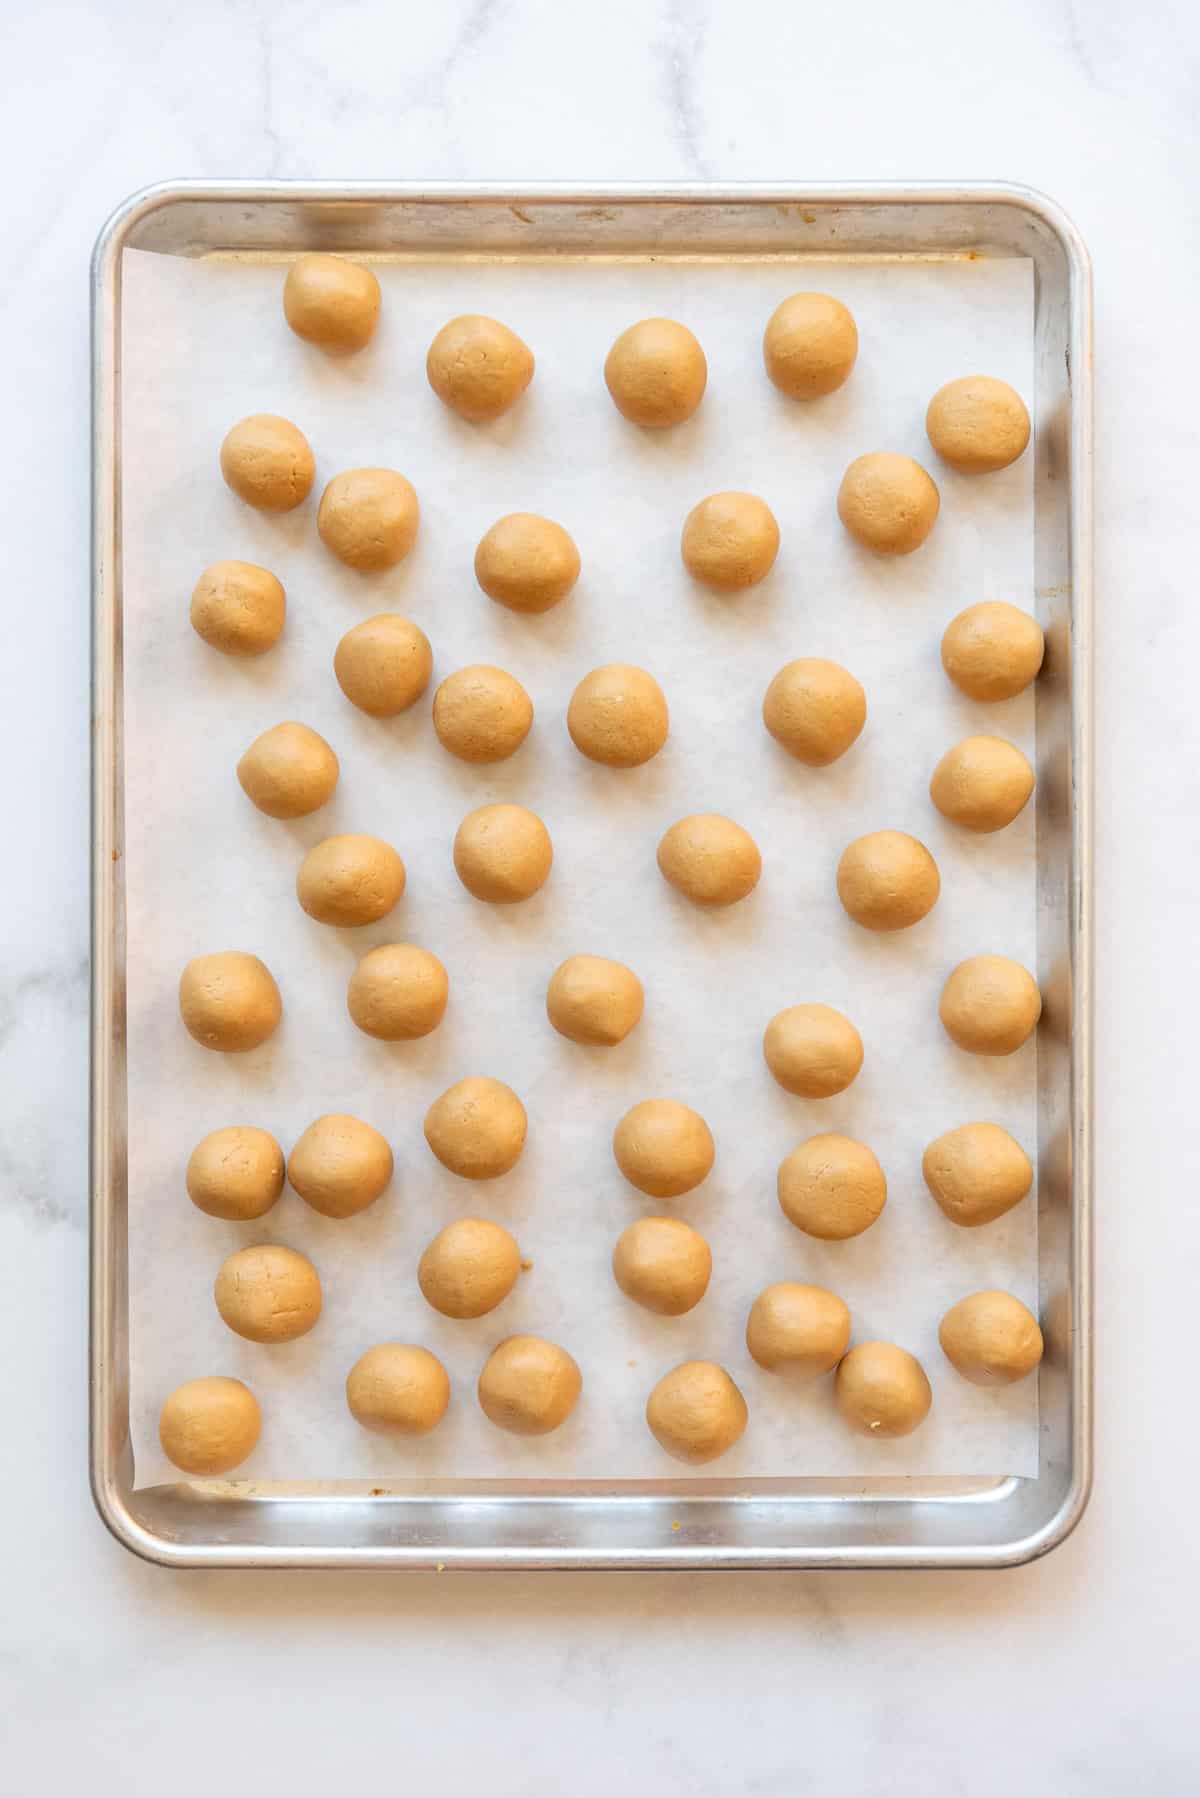 A baking sheet filled with the peanut butter centers of buckeyes candy before dipping.